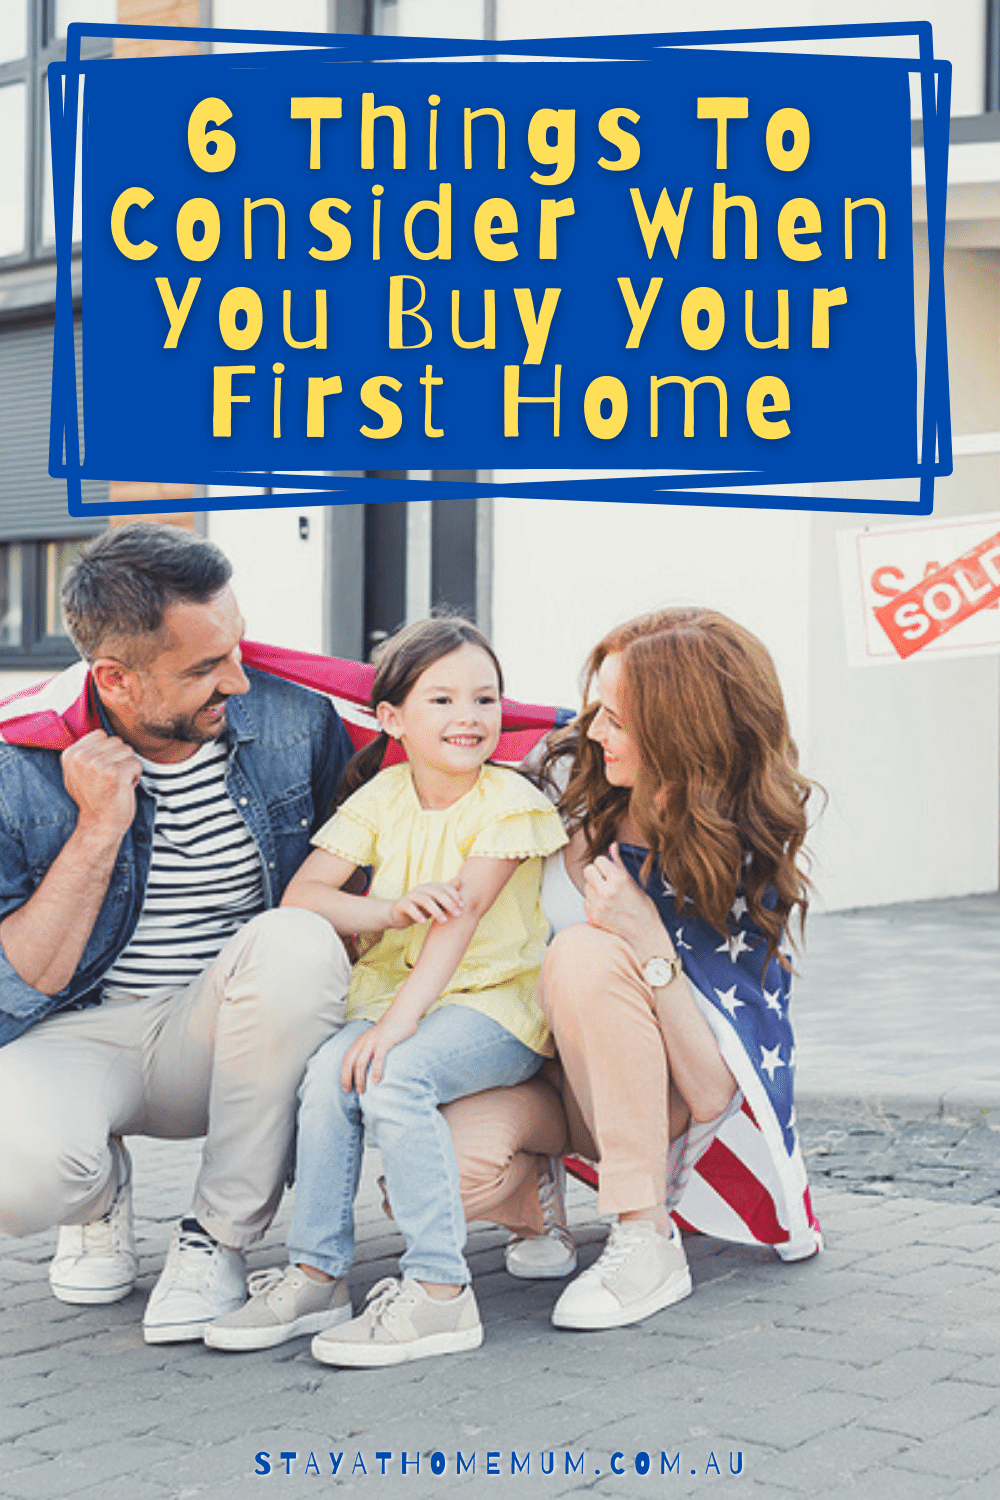 6 Things To Consider When You Buy Your First Home | Stay At Home Mum